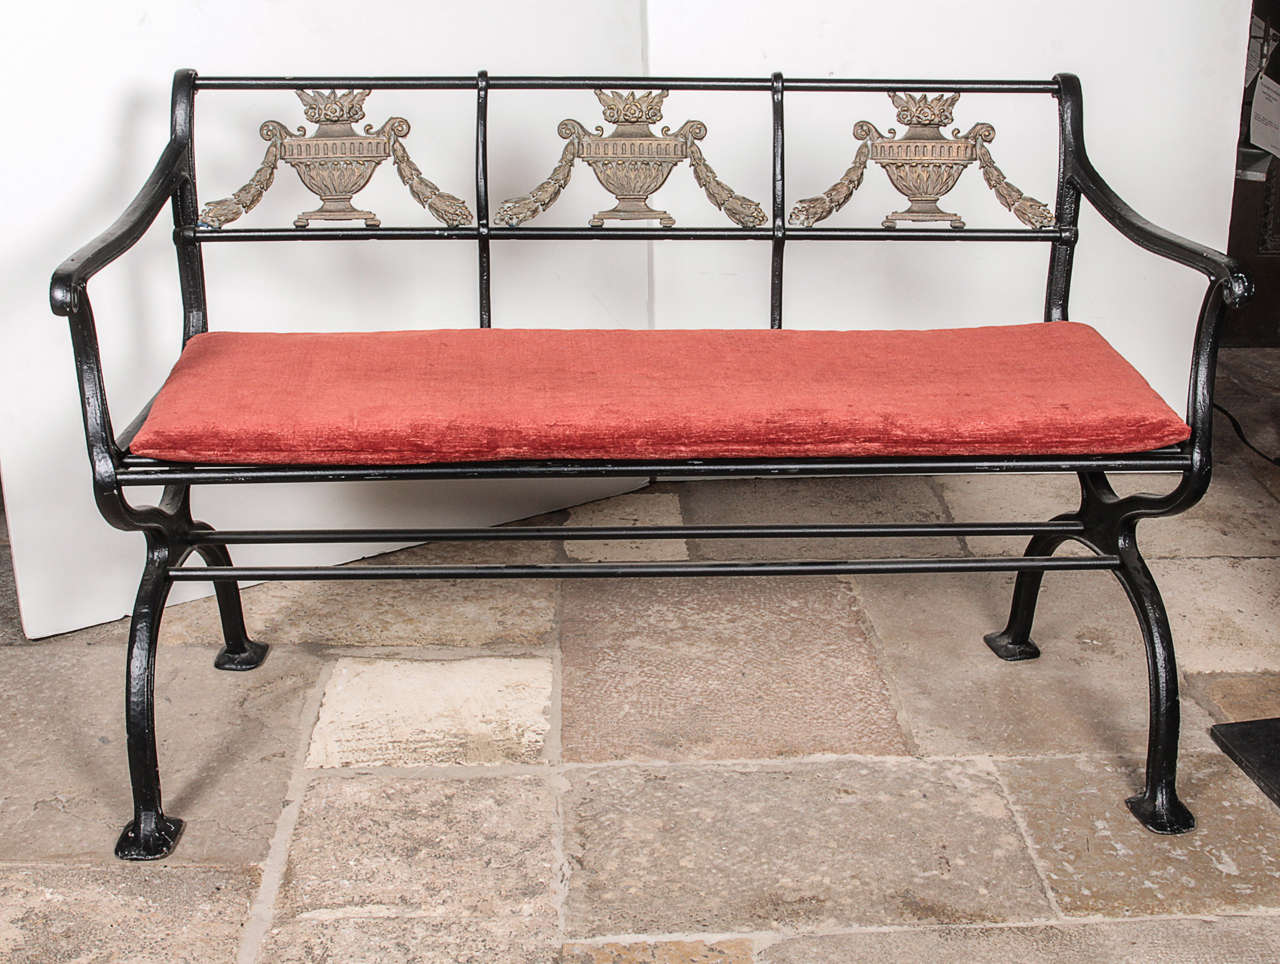 A fabulous set of Neoclassical cast iron and bronze seating, consisting of a bench, side chair and armchair. All are supported on curbed bases. American, circa 1910. Each piece includes a removable cushion. 

Bench:  30"H x 47"W x